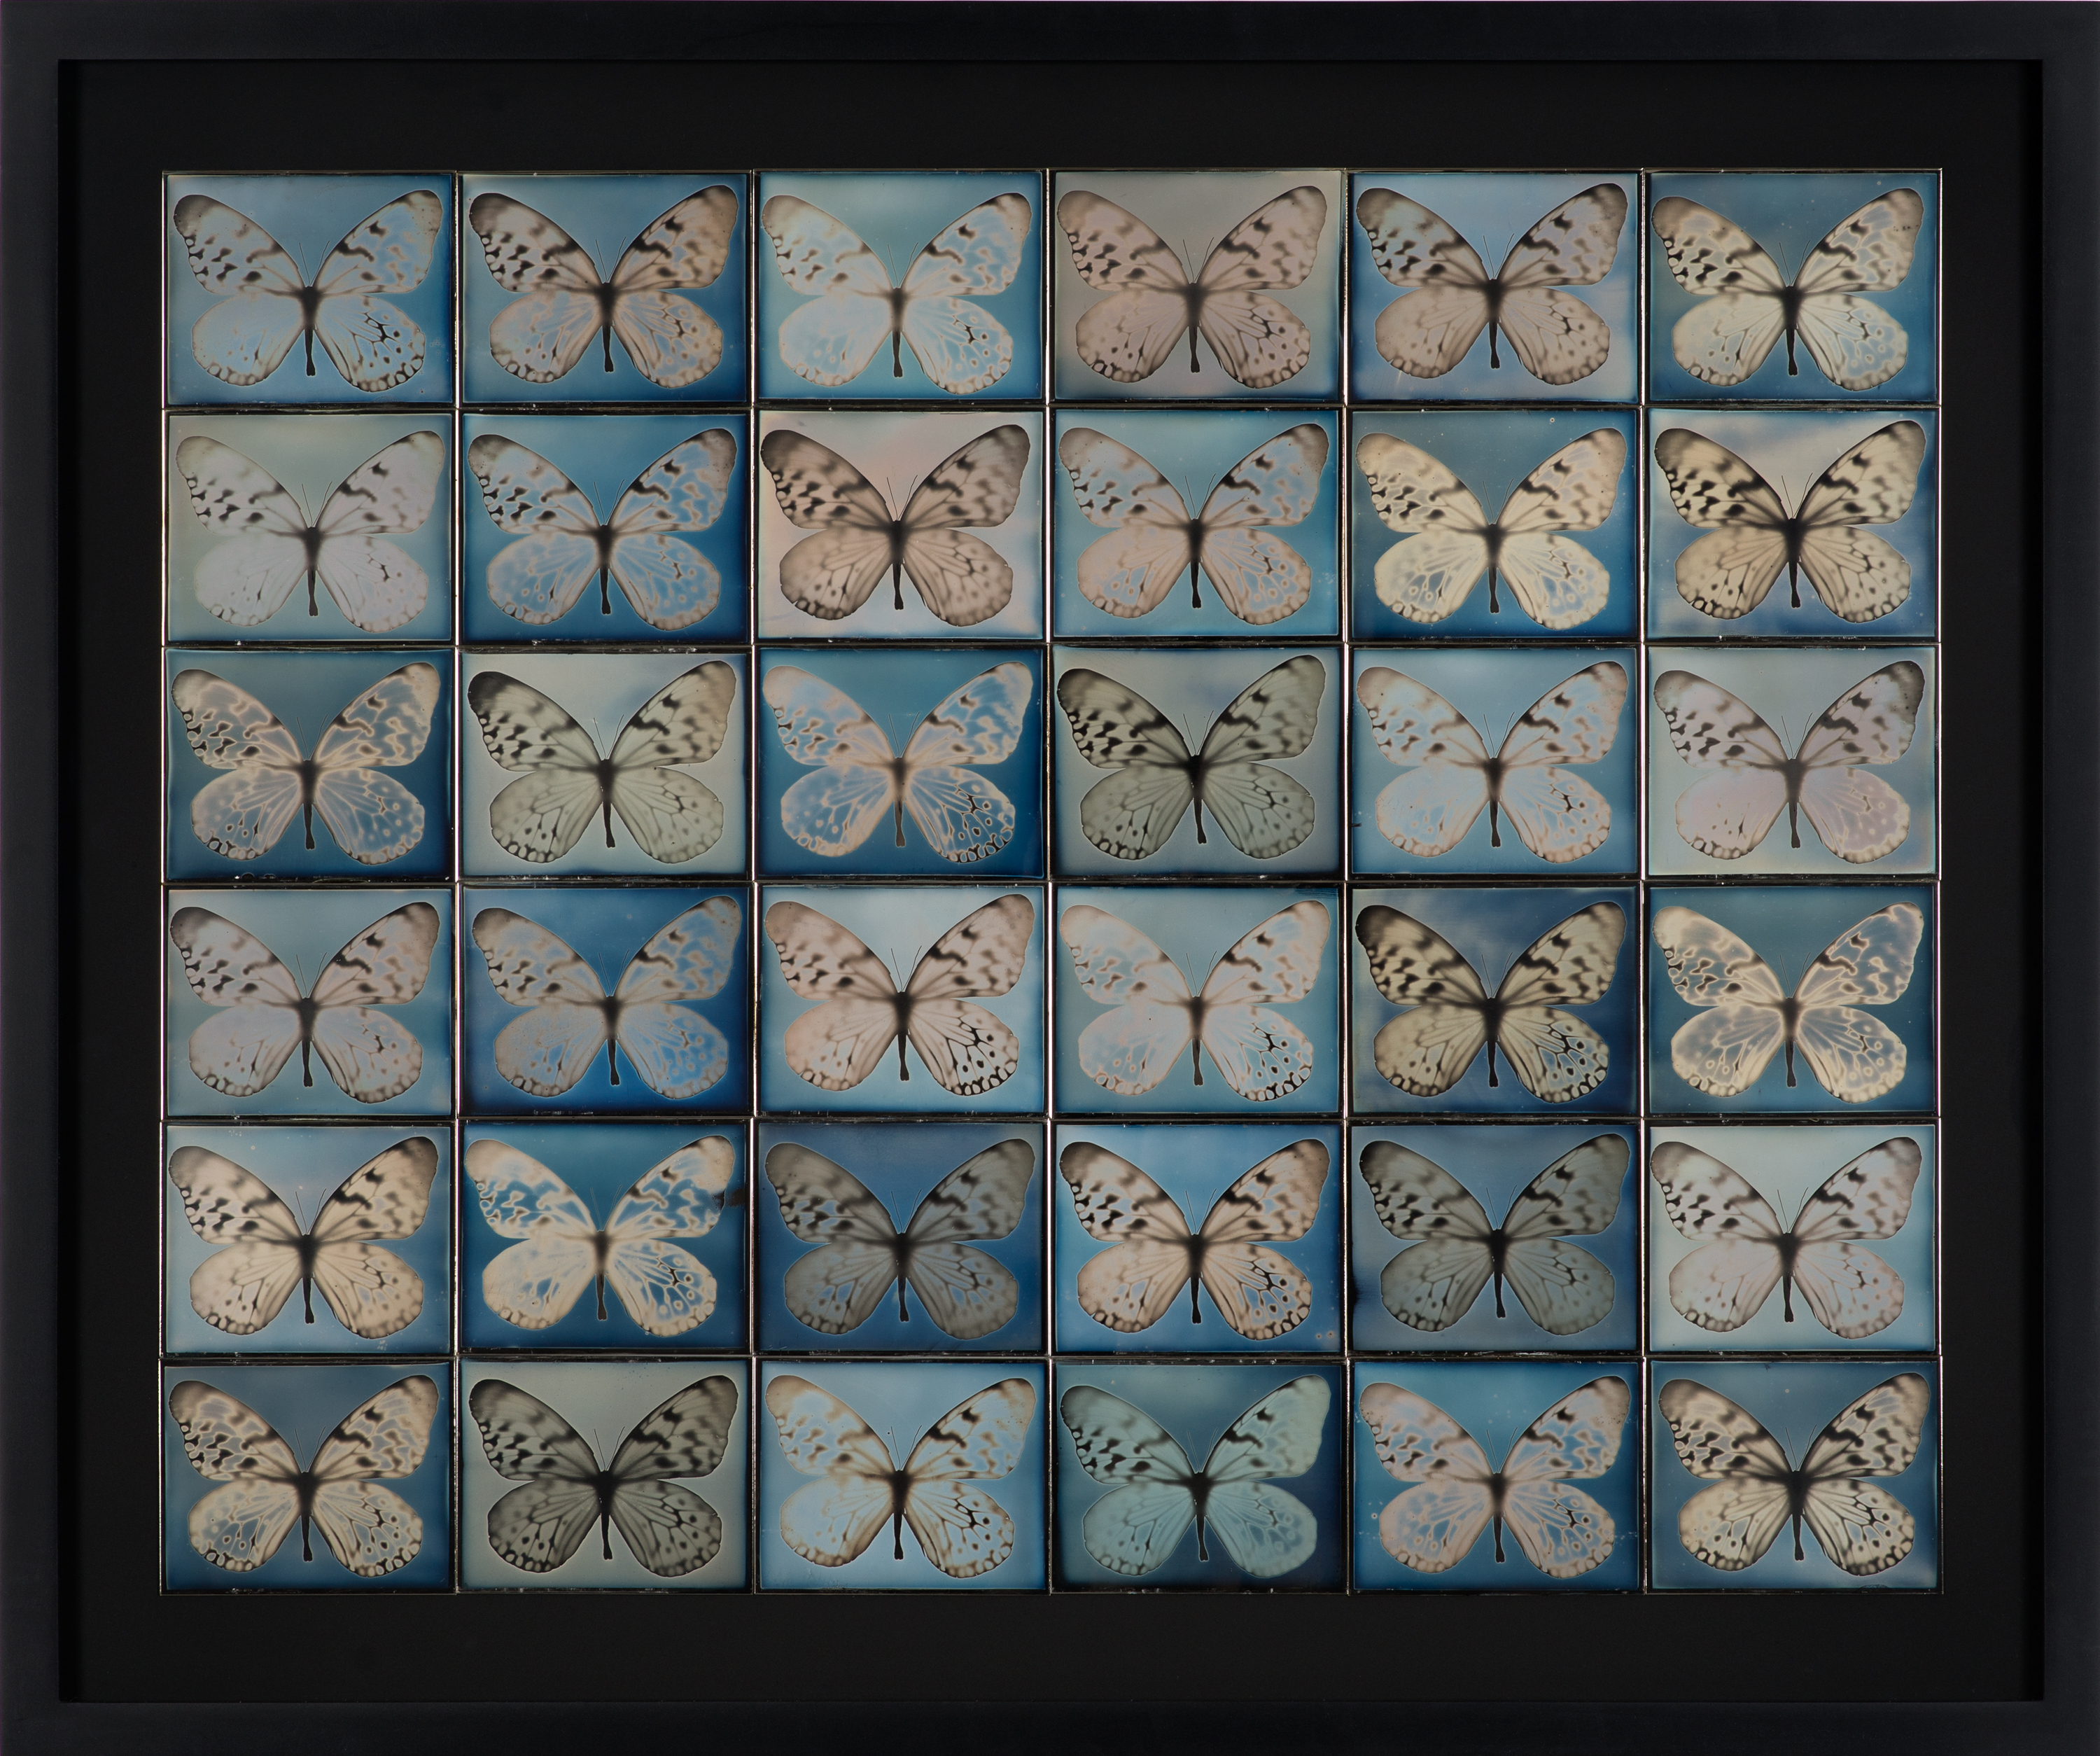 Color image of thirty-six daguerreotypes in a six by six grid depicting butterflies framed in black